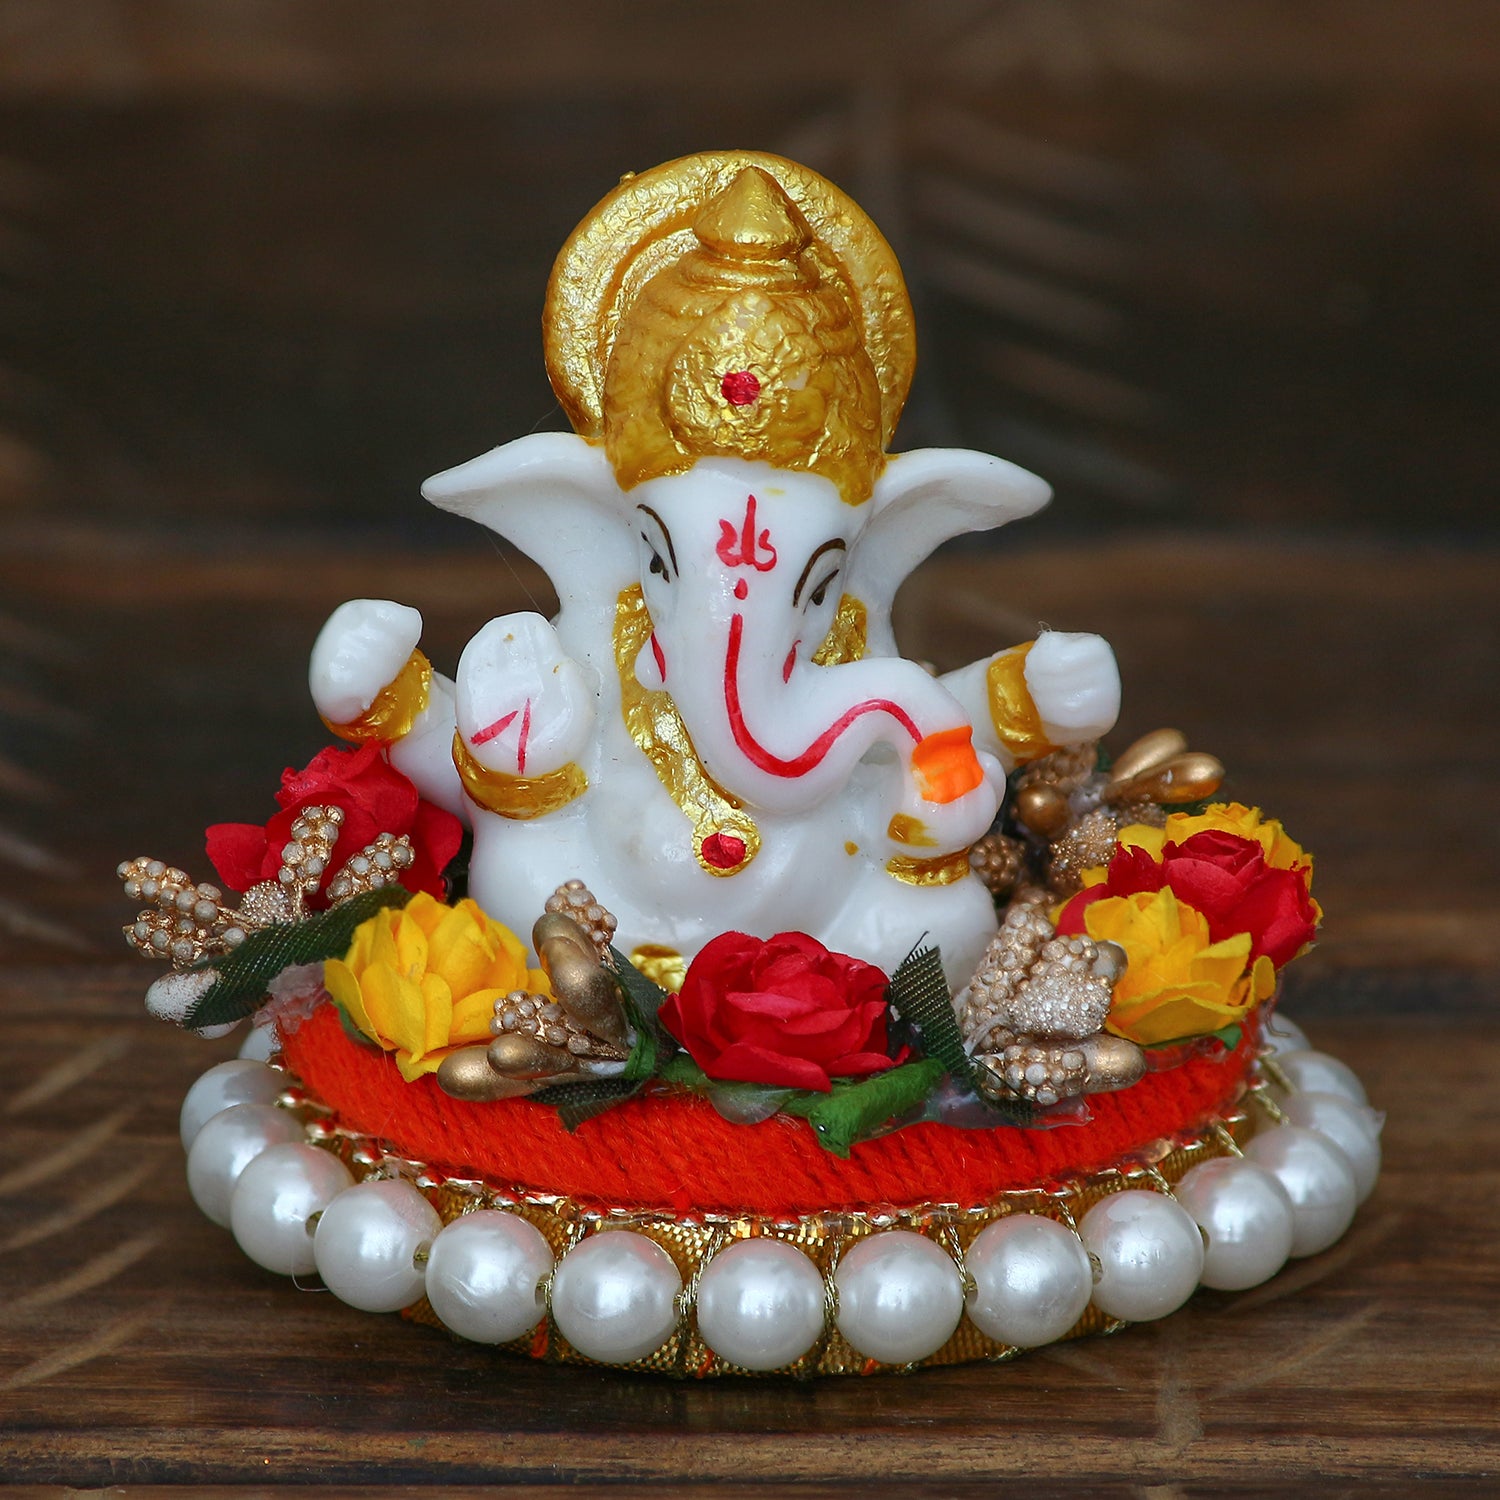 Polyresin Lord Ganesha Statue on Decorative Handcrafted Plate for Home, Office and Car Dashboard 1